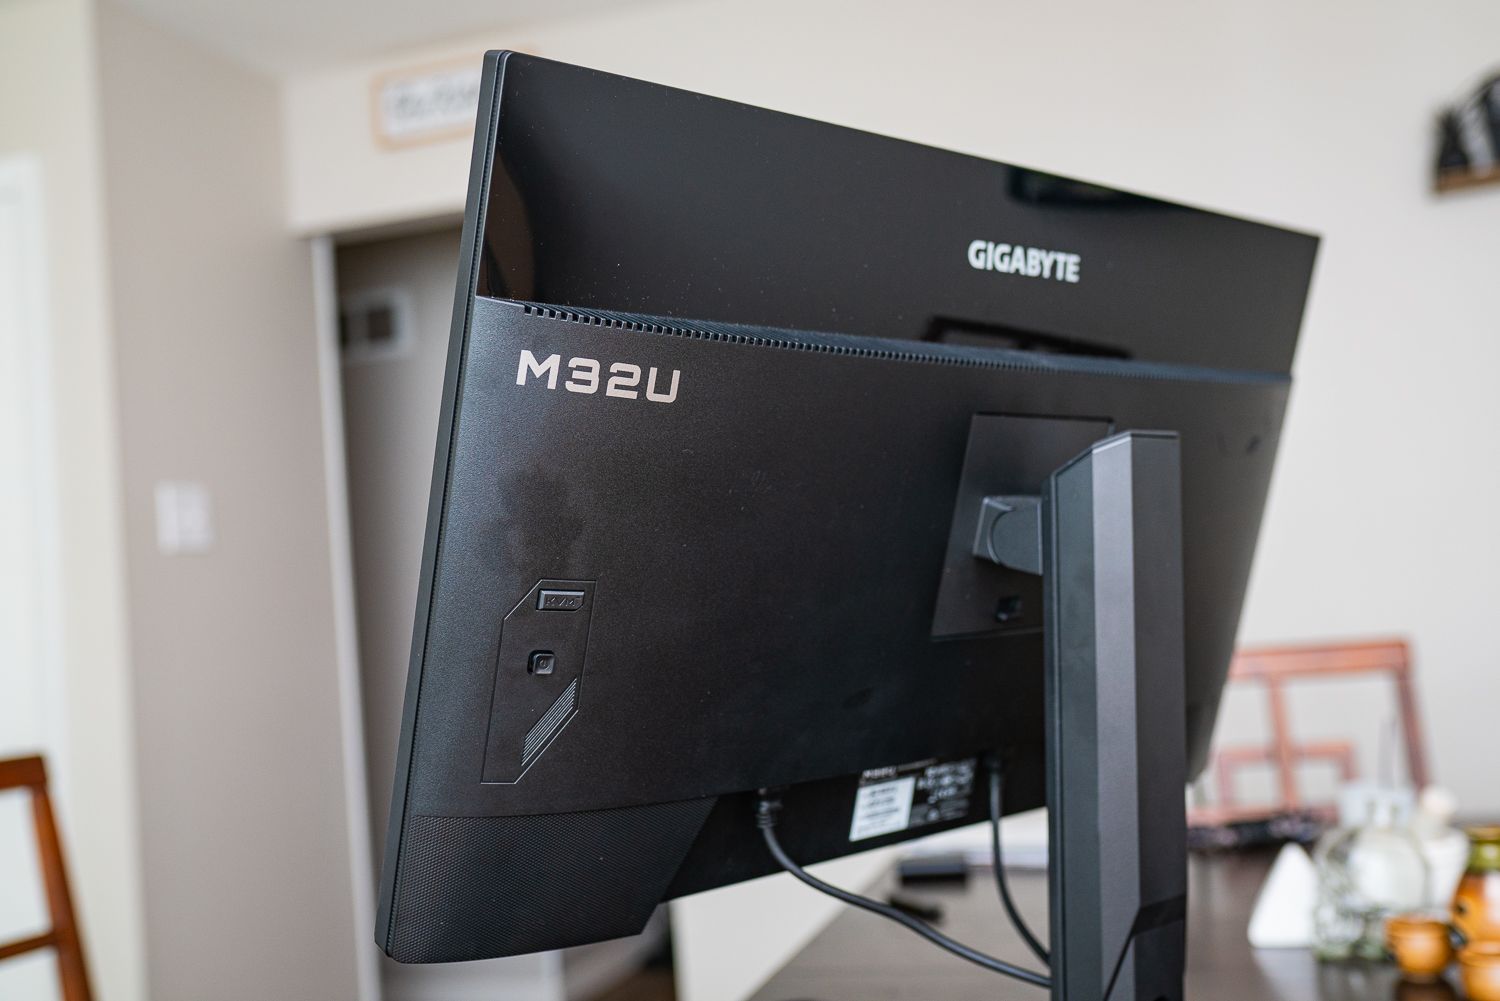 Gigabyte M32U Review - The Affordable 4K Gaming Monitor 